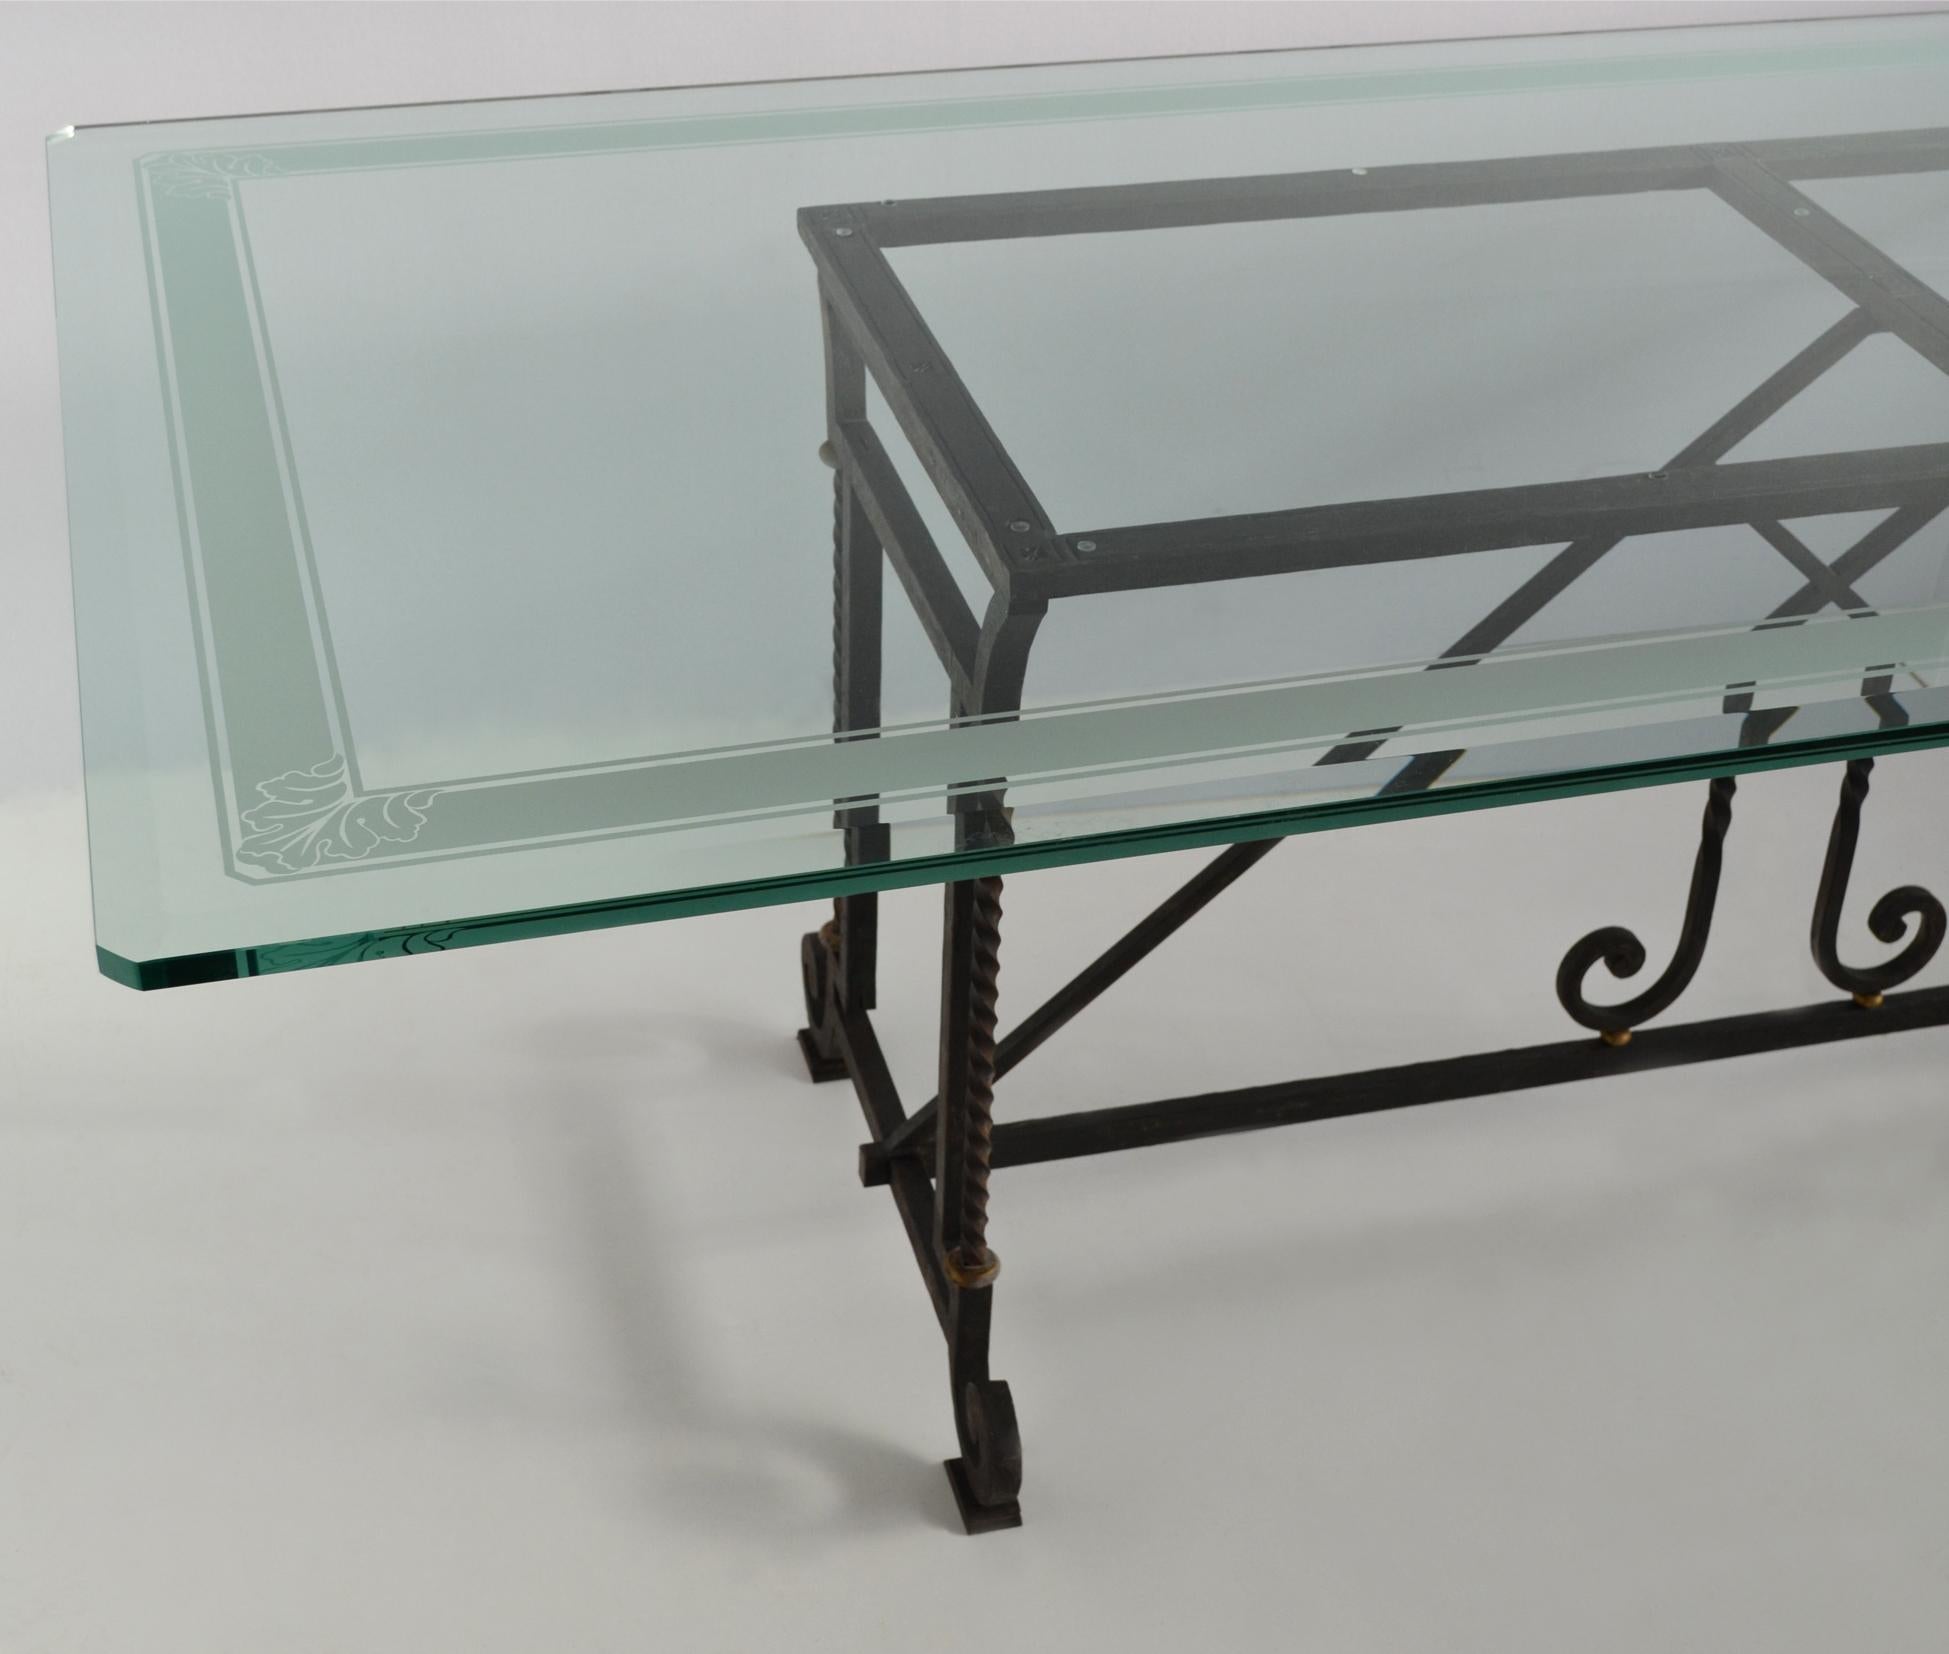 Special rectangular dining table composed by an extra light crystal  top with a sandblasted handmade decoration in the perimeter of the top. The base is manufactured by our skilled craftmen in wrought iron and you can ask for customization the